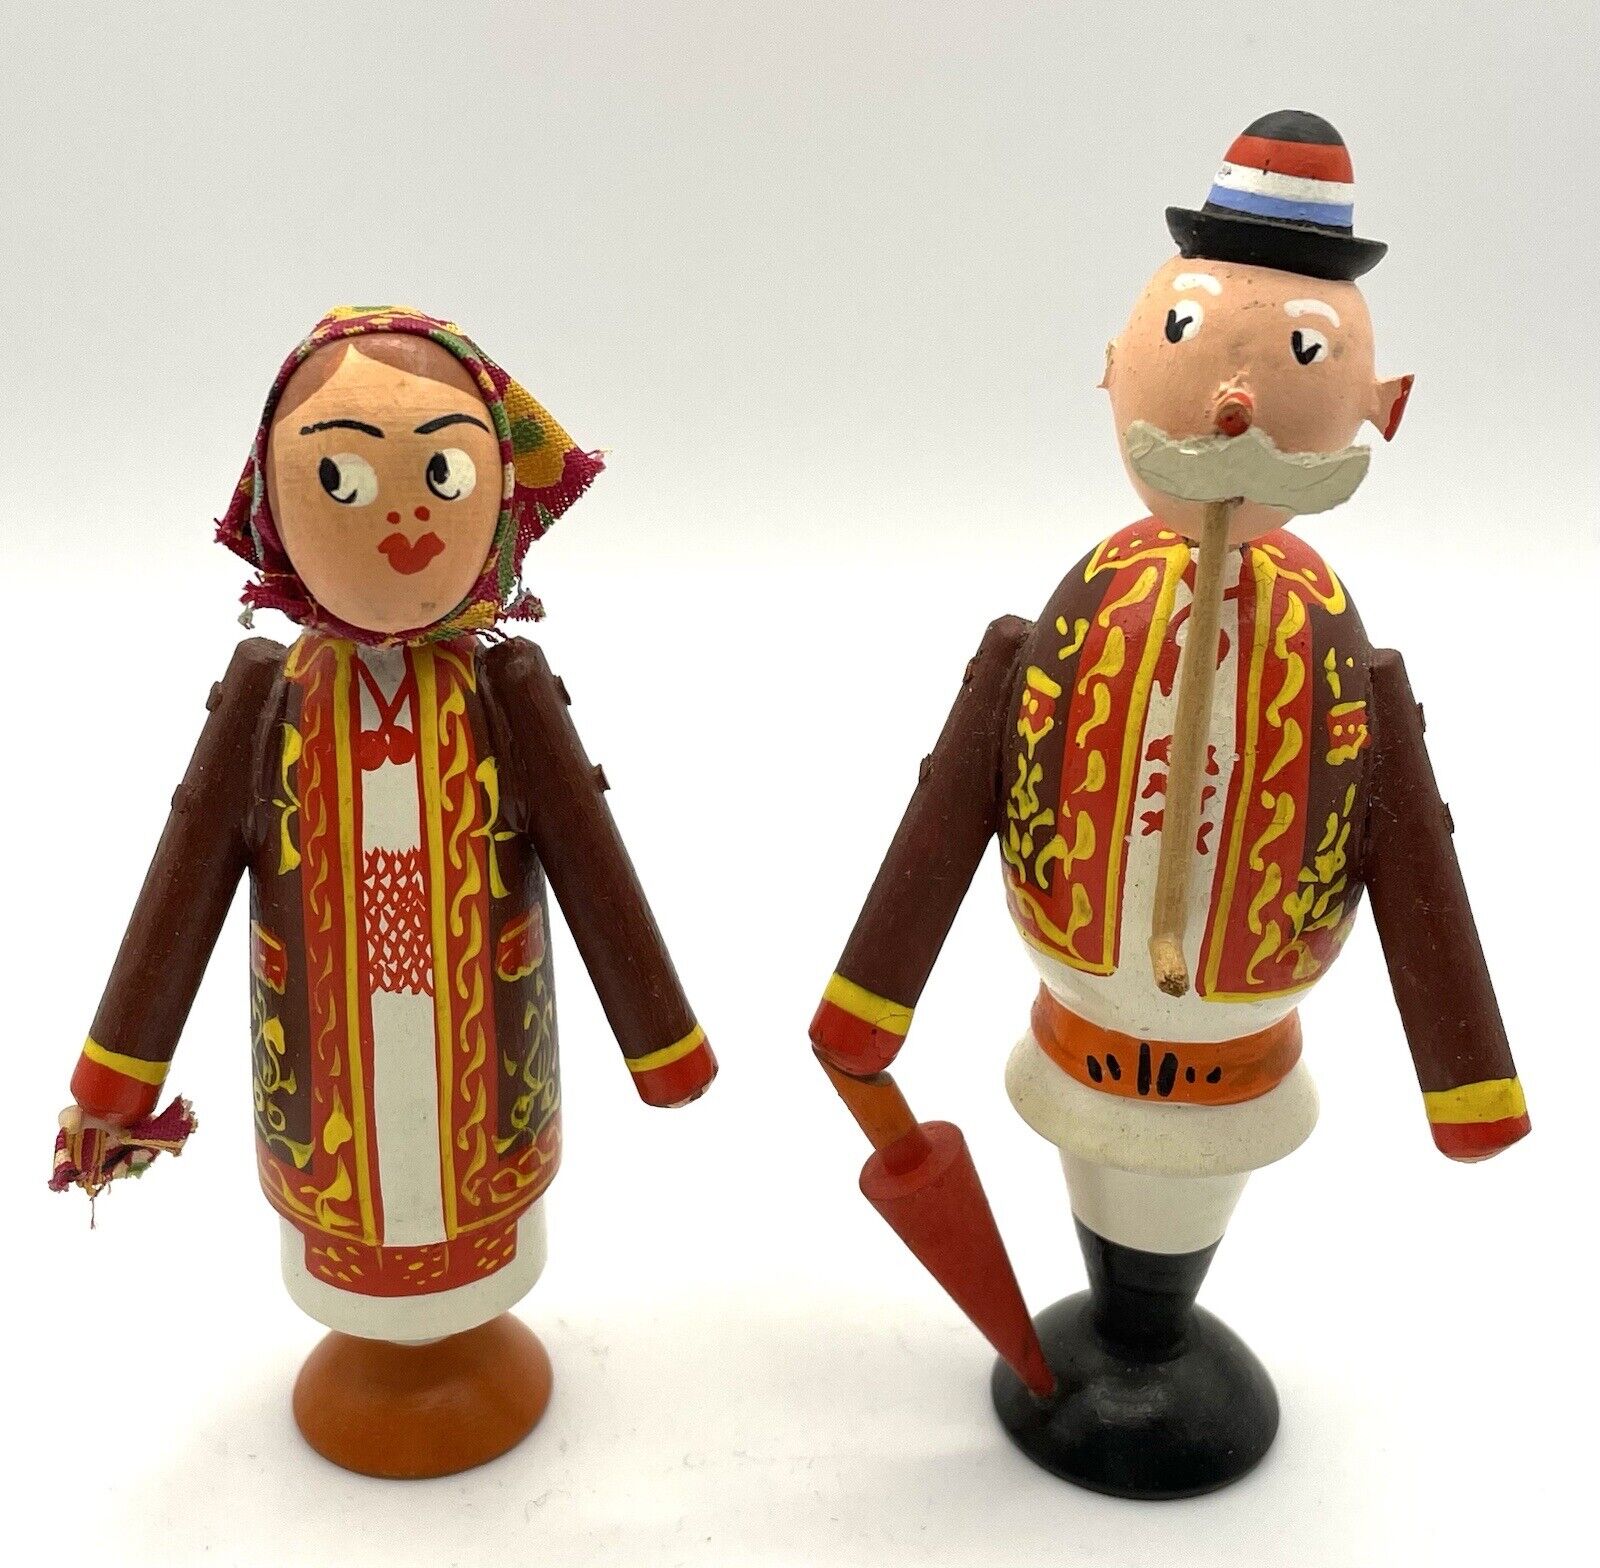 VTG Russian Wooden Couple Figurines, Traditional Costume, 4.25”H